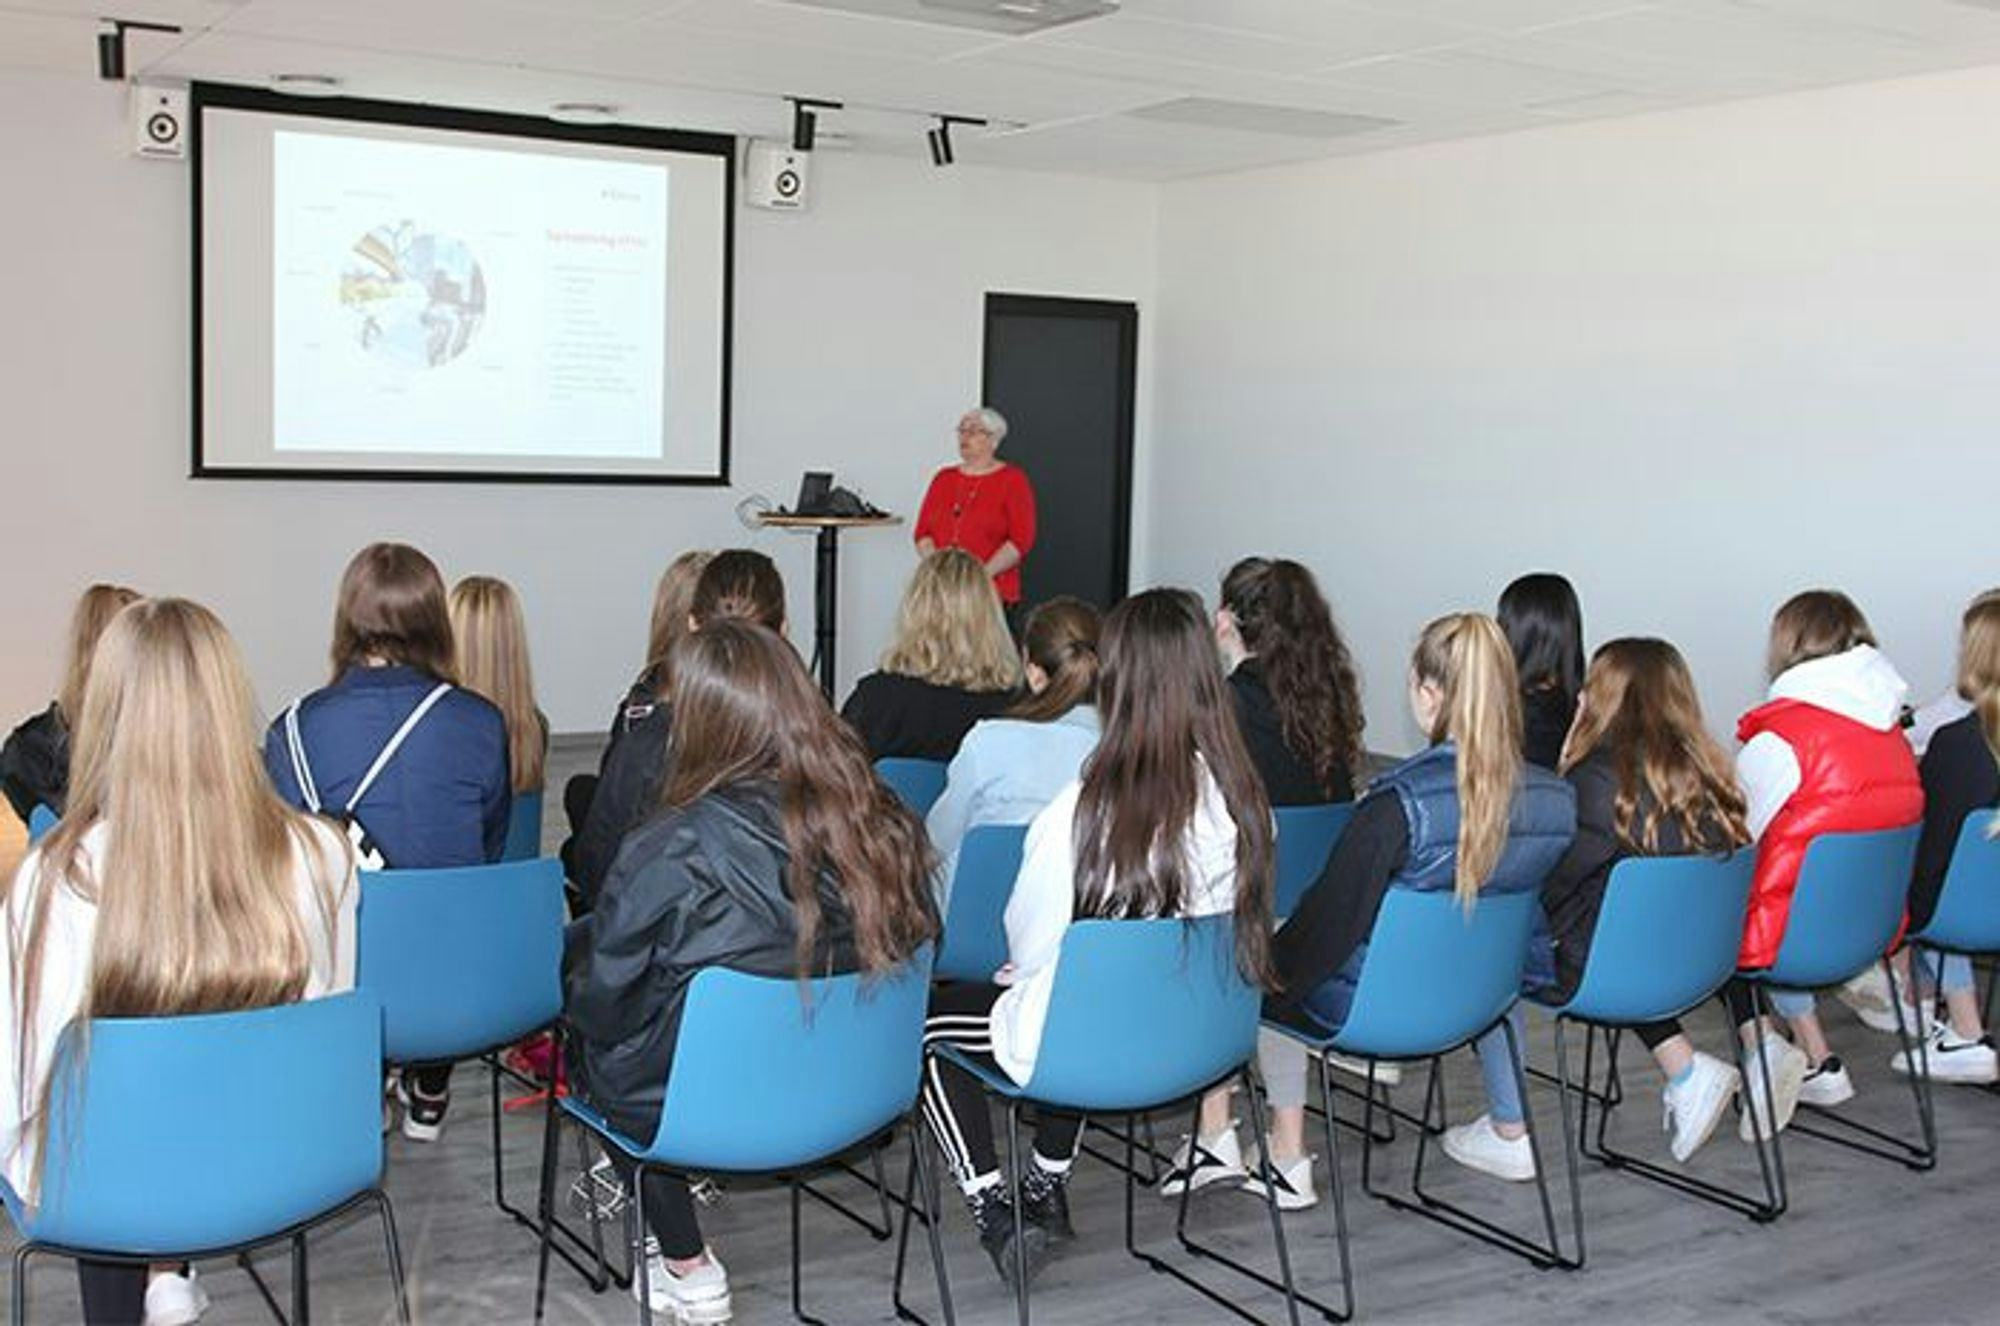 An audience of young girls facing a presenter next to a projection screen